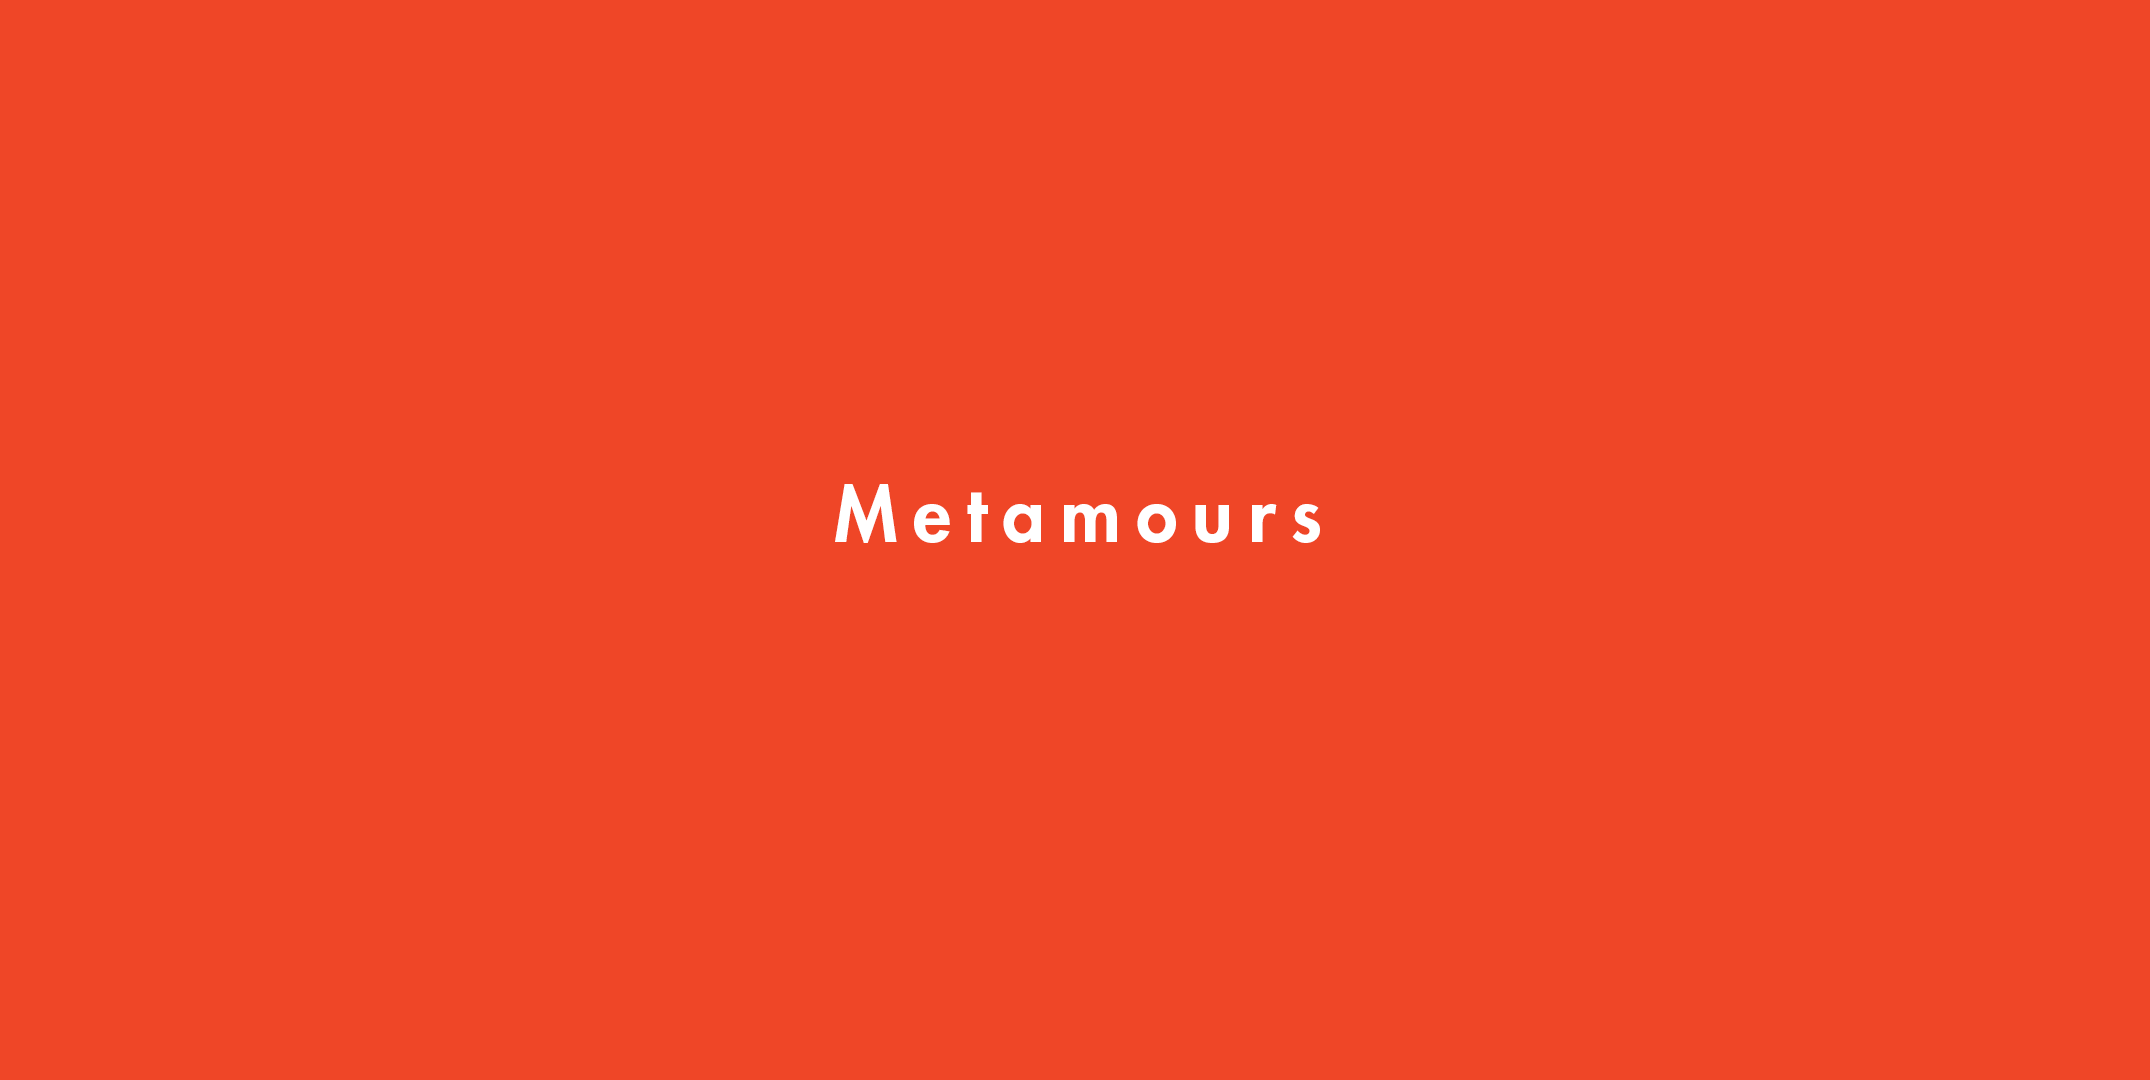 Metamours Definition